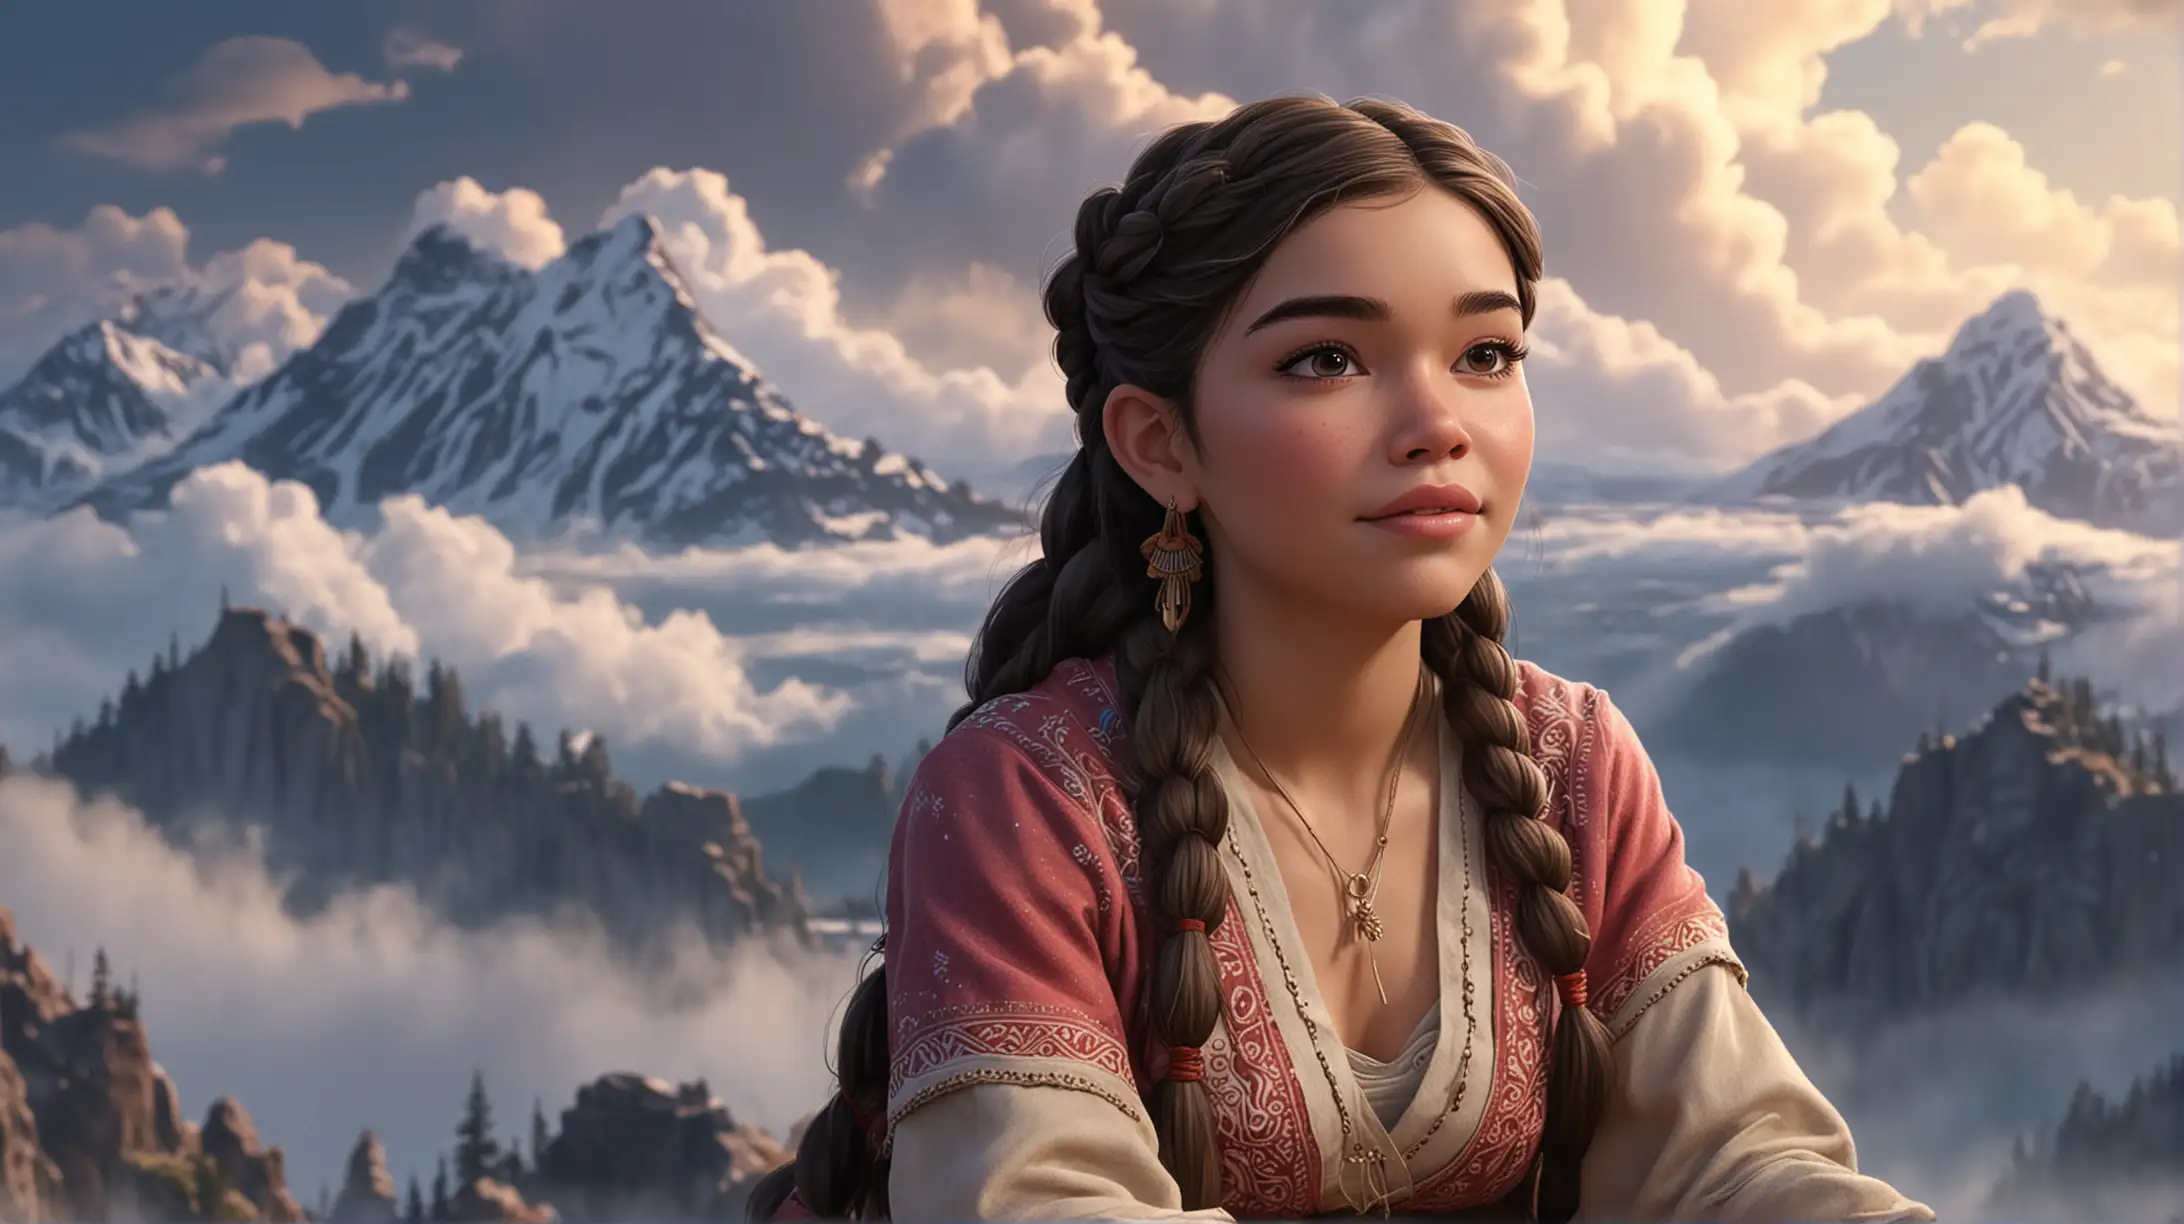 Cartoon Illustration of Hailee Steinfeld as Indian Woman Sitting atop a Mountain in the Clouds